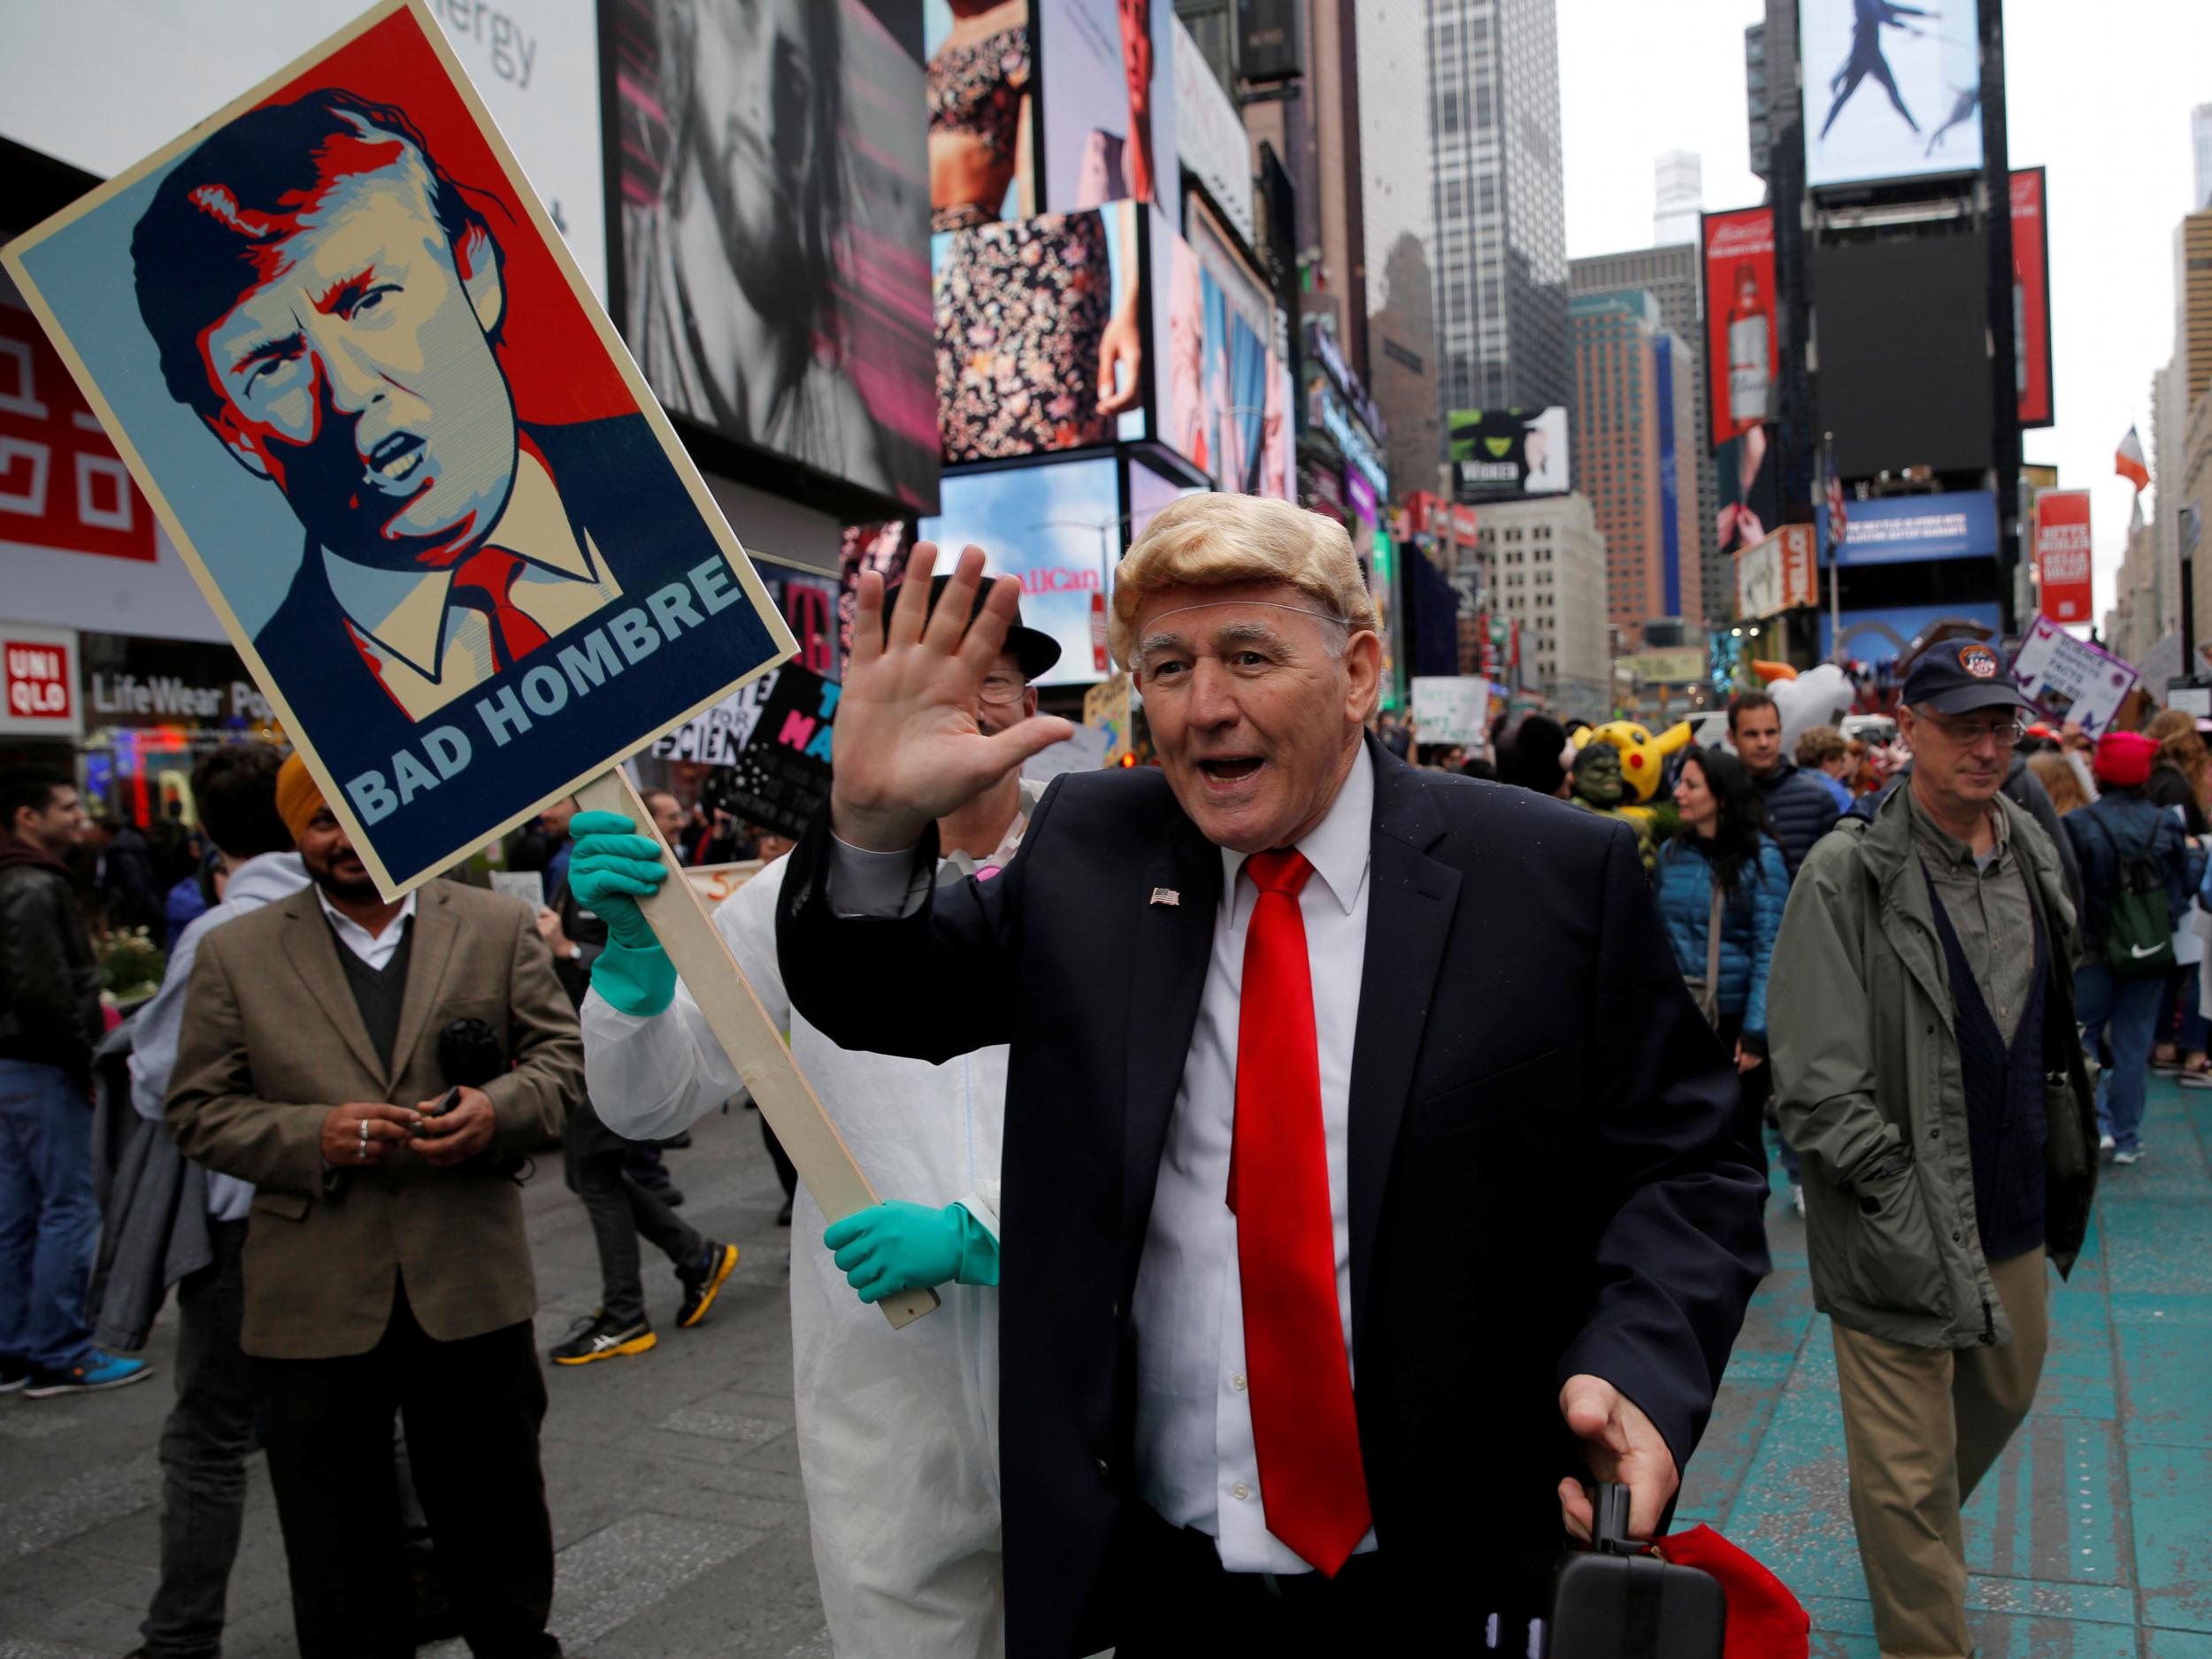 A person dressed as US President Donald Trump walks among protesters during the Earth Day 'March For Science NYC' demonstration in Manhattan, New York